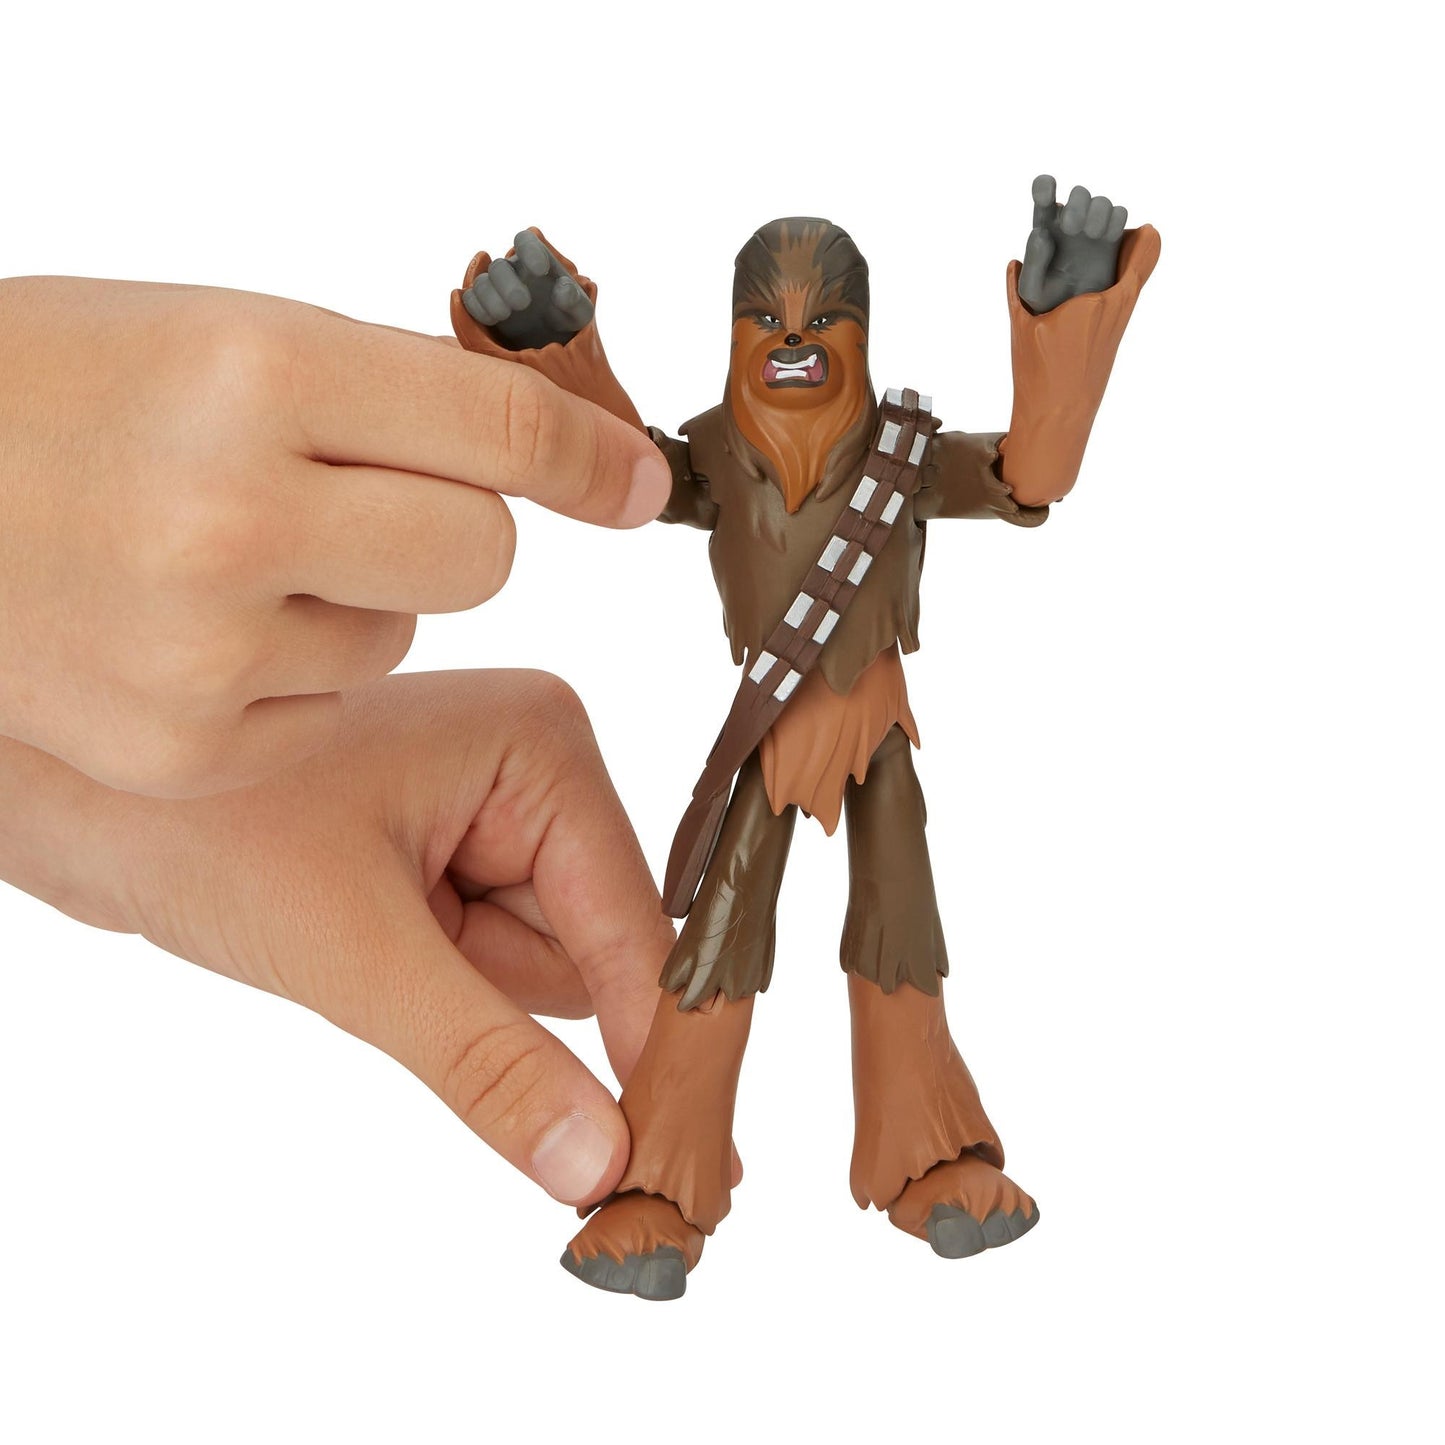 Star Wars Galaxy of Adventures Chewbacca 5-Inch-Scale Action Figure Toy